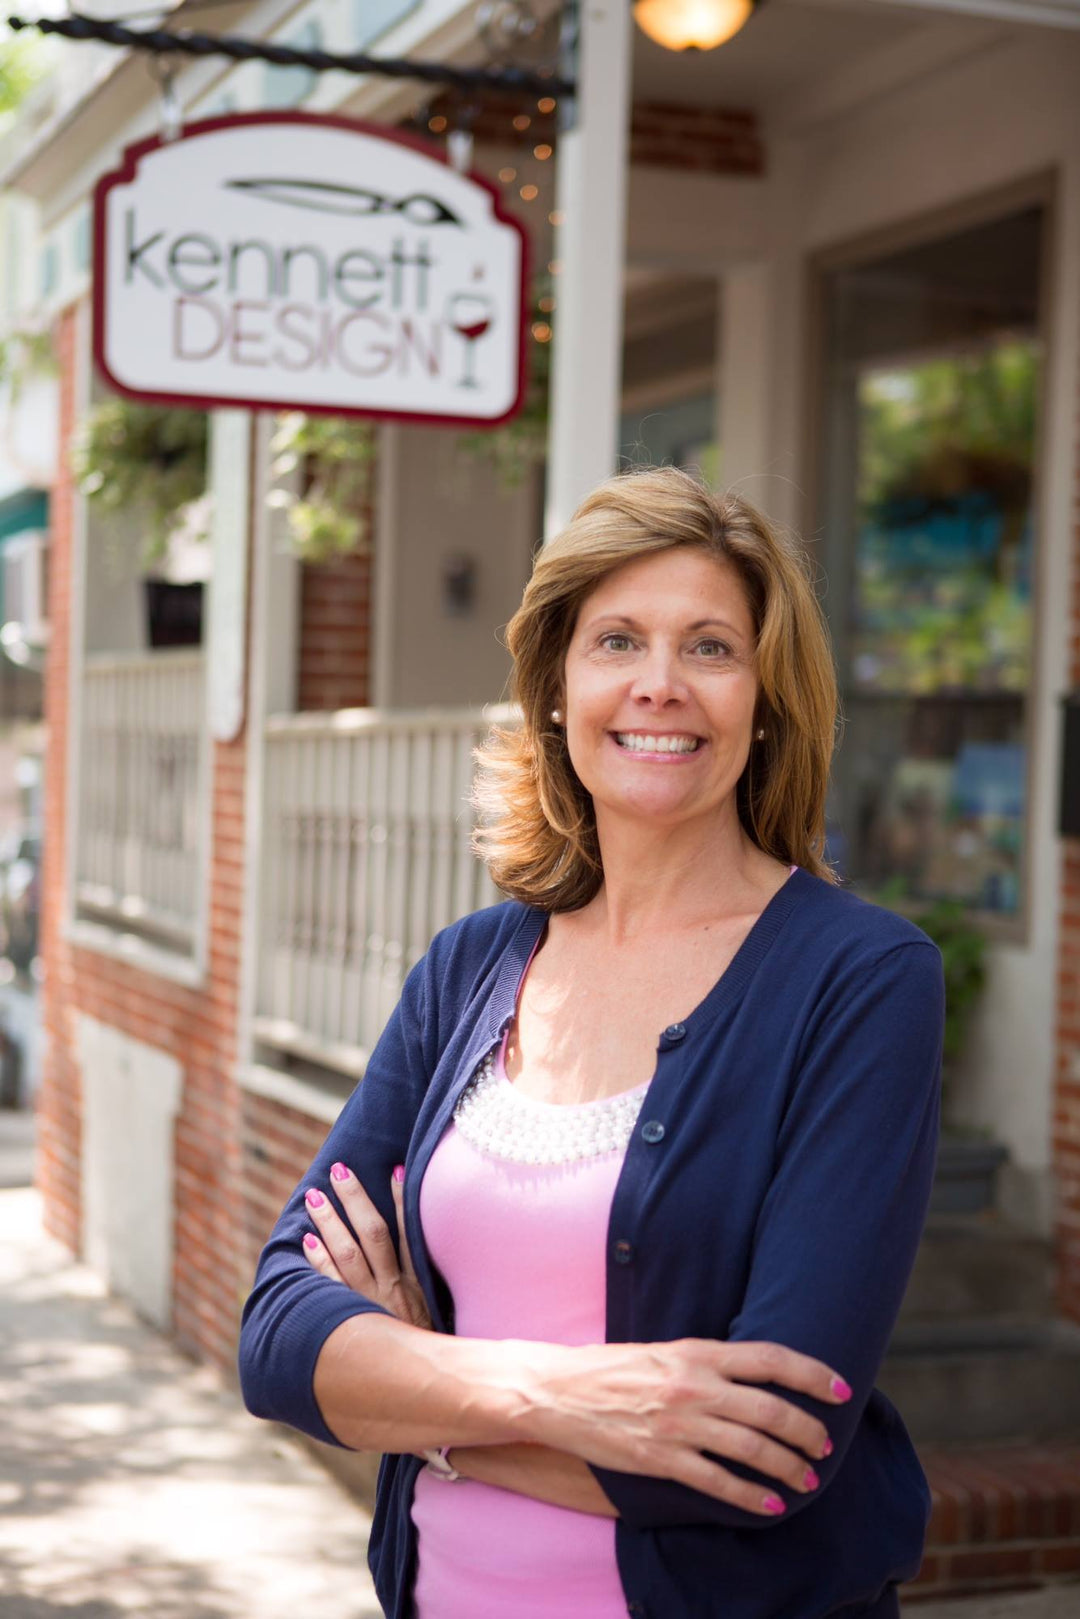 Featured #bloomgirl: Marion; Founder of Kennett Design!